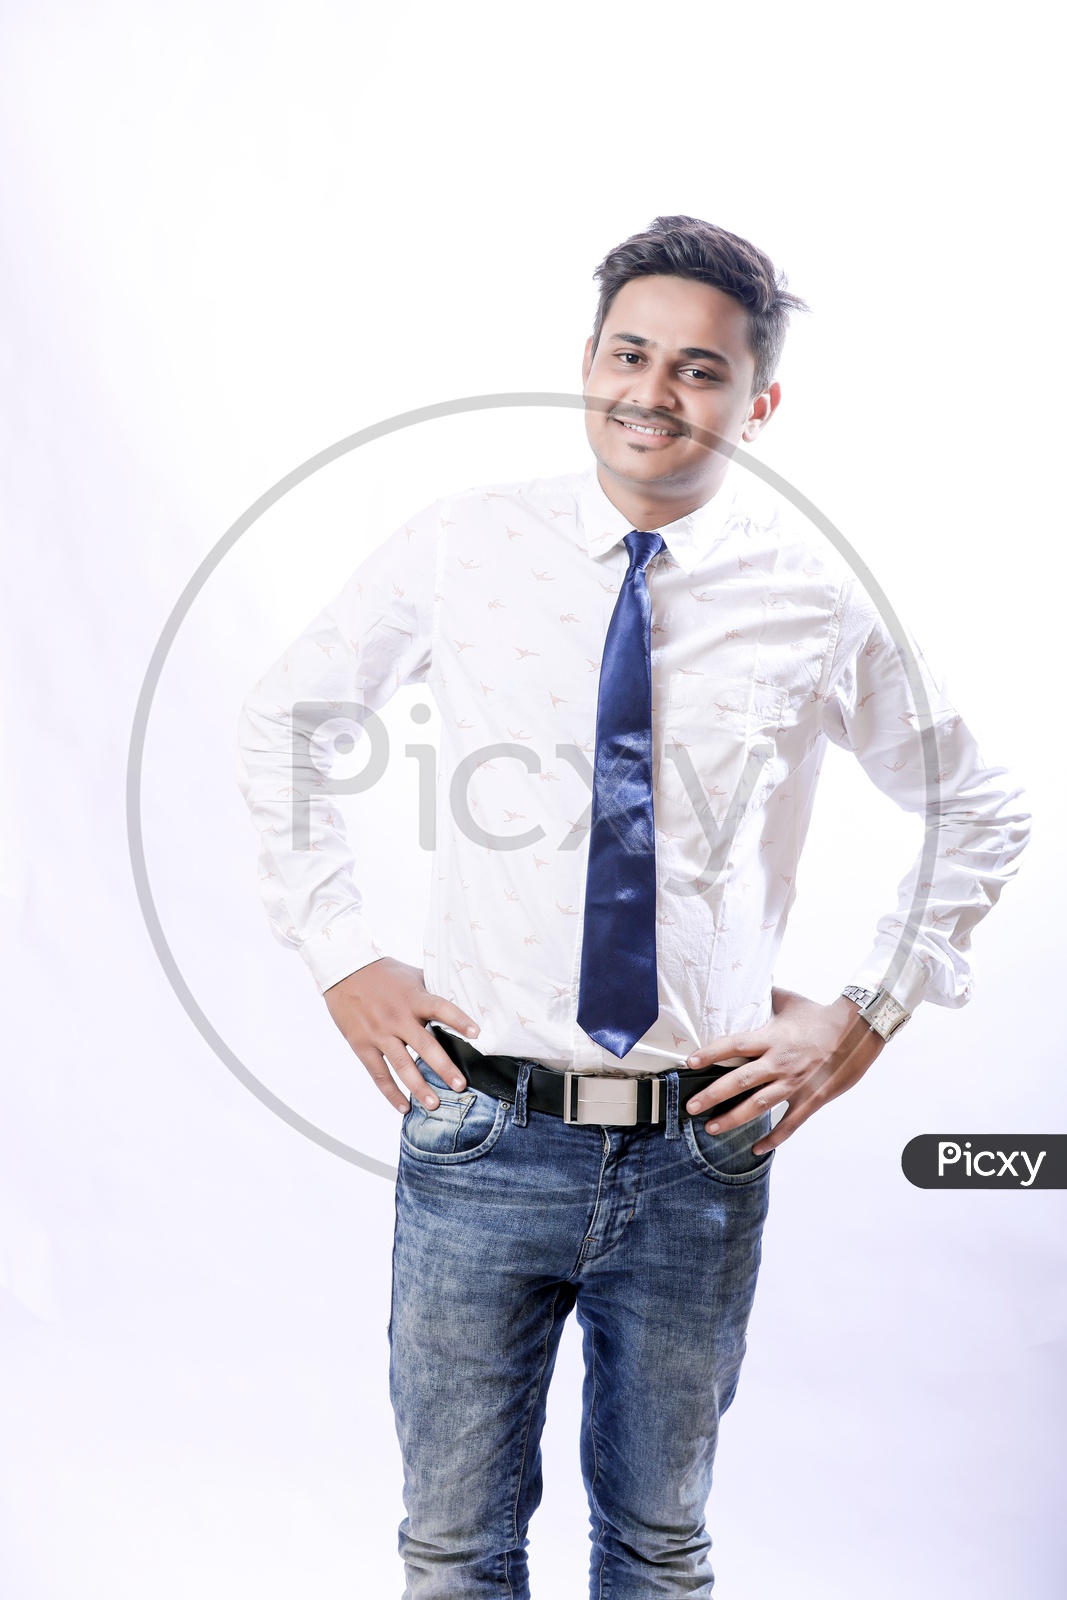 Portrait Of A Confident Youngman in Formalwear  With Expression and looking to Camera With White  Background